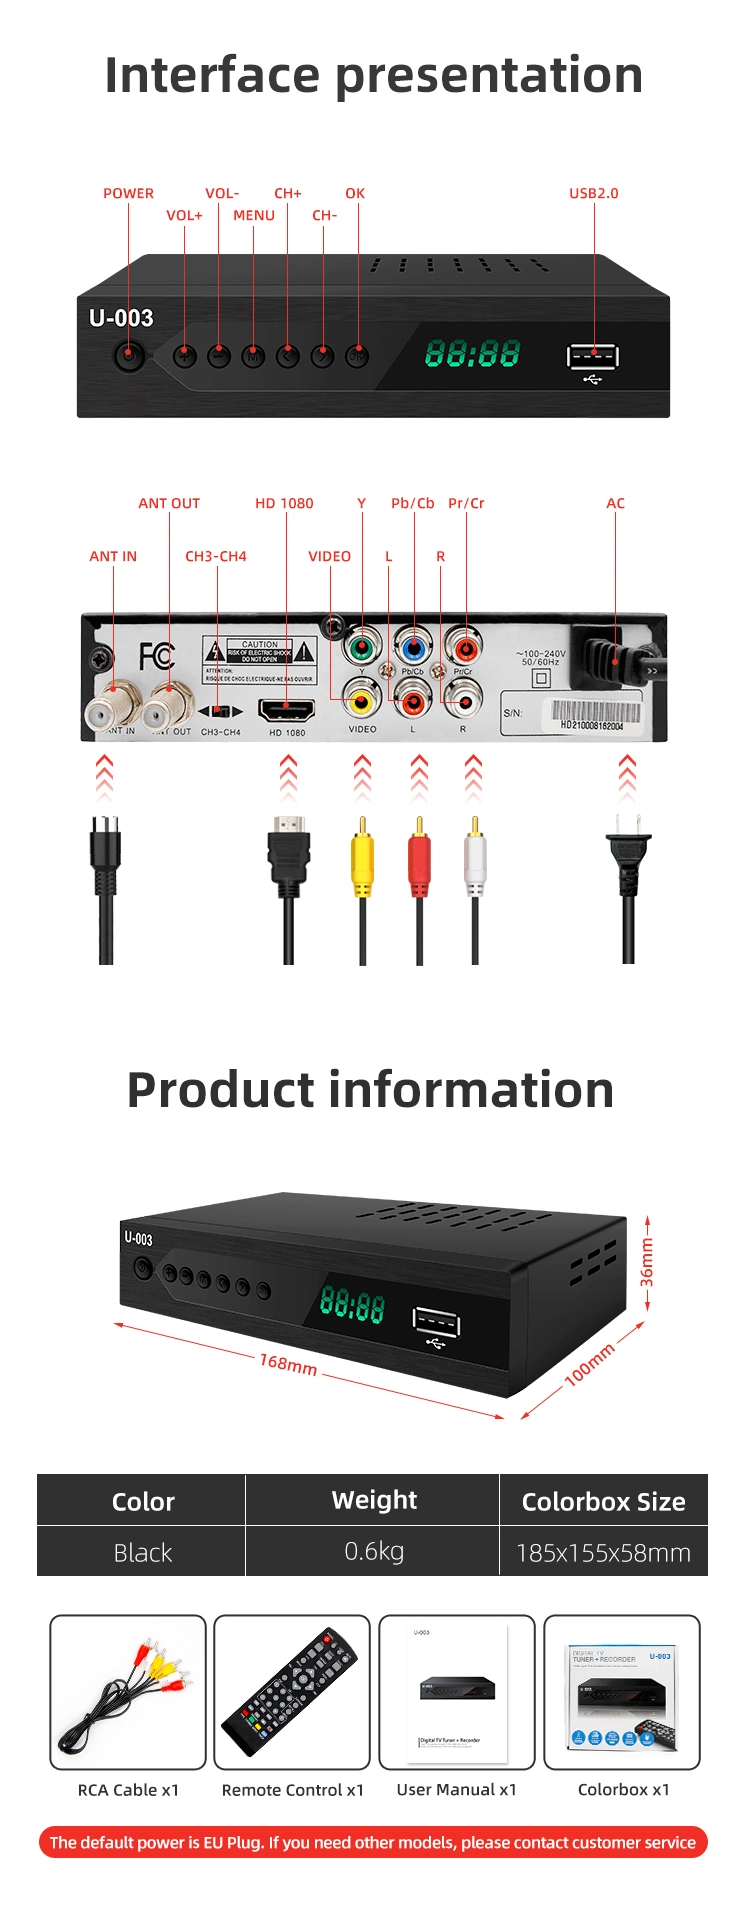 China Wholesaler WiFi HD ATSC Set Top Box Connect with Smart TV for Americas